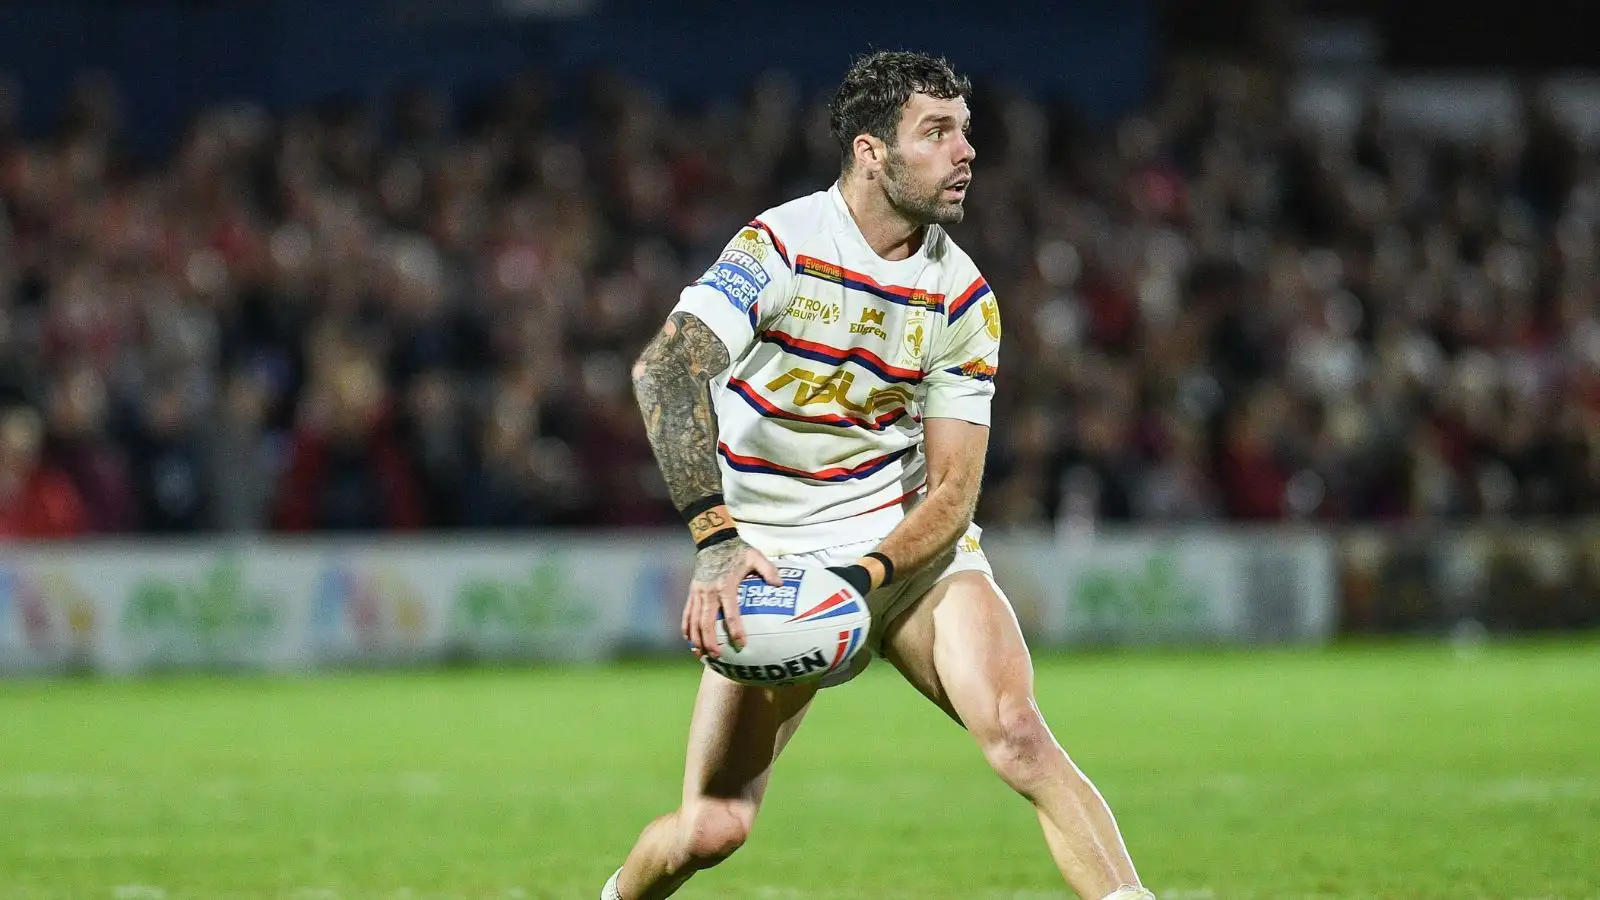 Wakefield’s Will Dagger attracting Championship interest following relegation